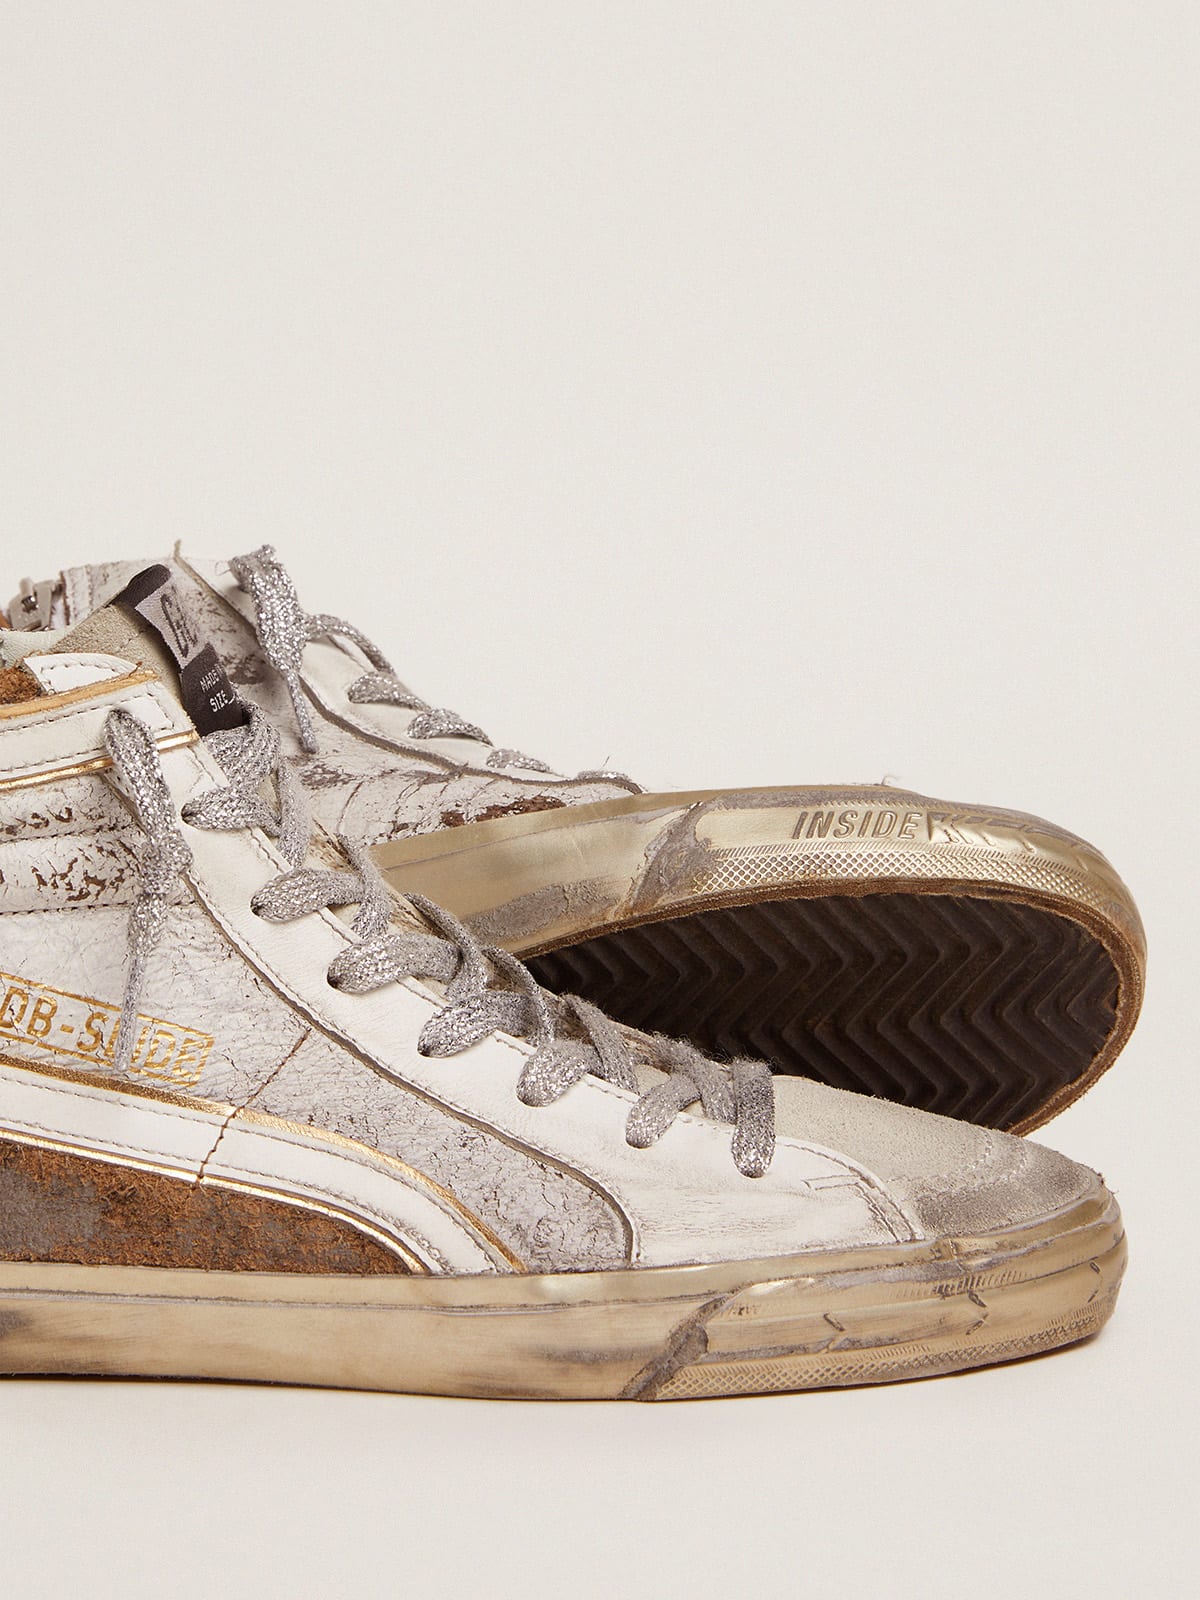 Slide sneakers in crackle leather and leopard-print suede | Golden Goose